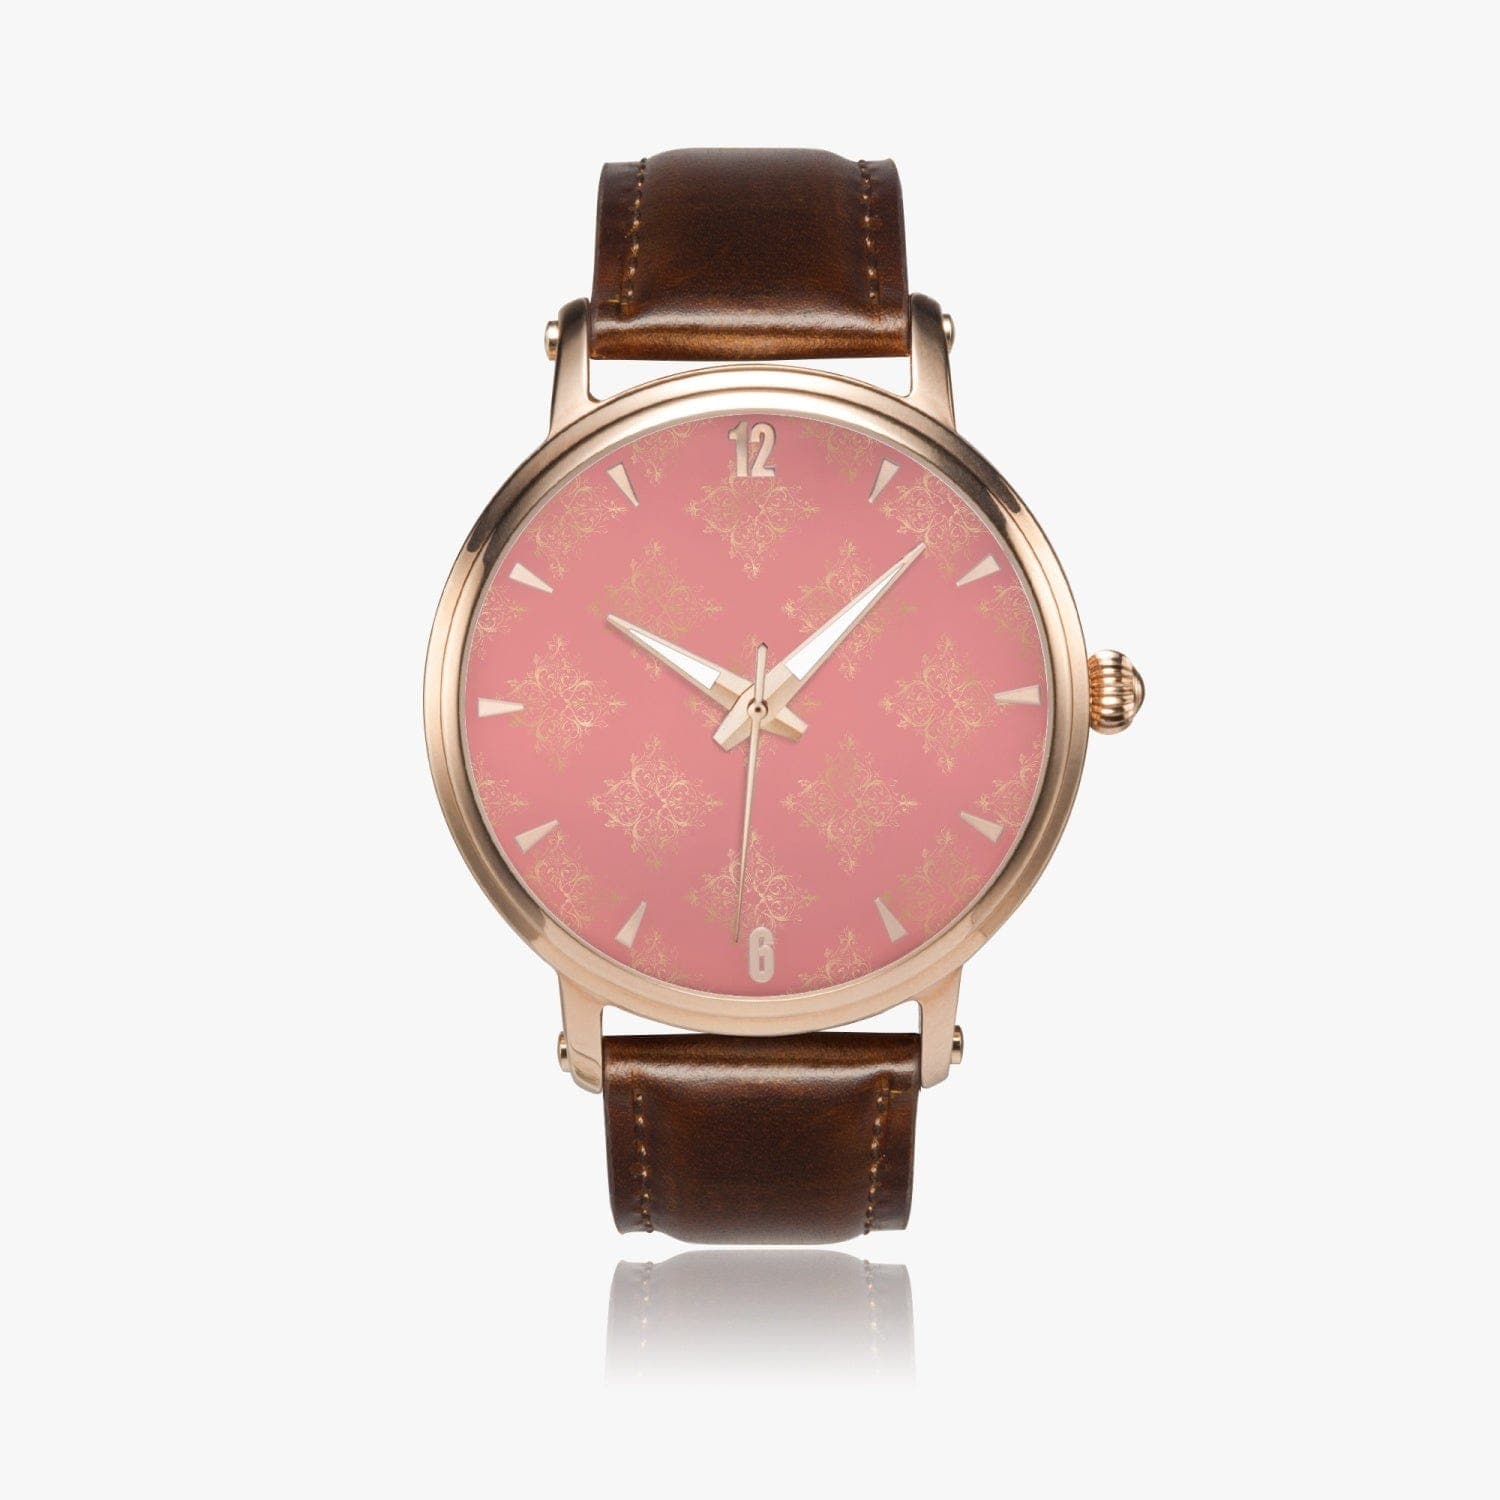 Rose and Gold Damask Patterned Collection II -. 46mm Unisex Automatic Watch (Rose Gold)